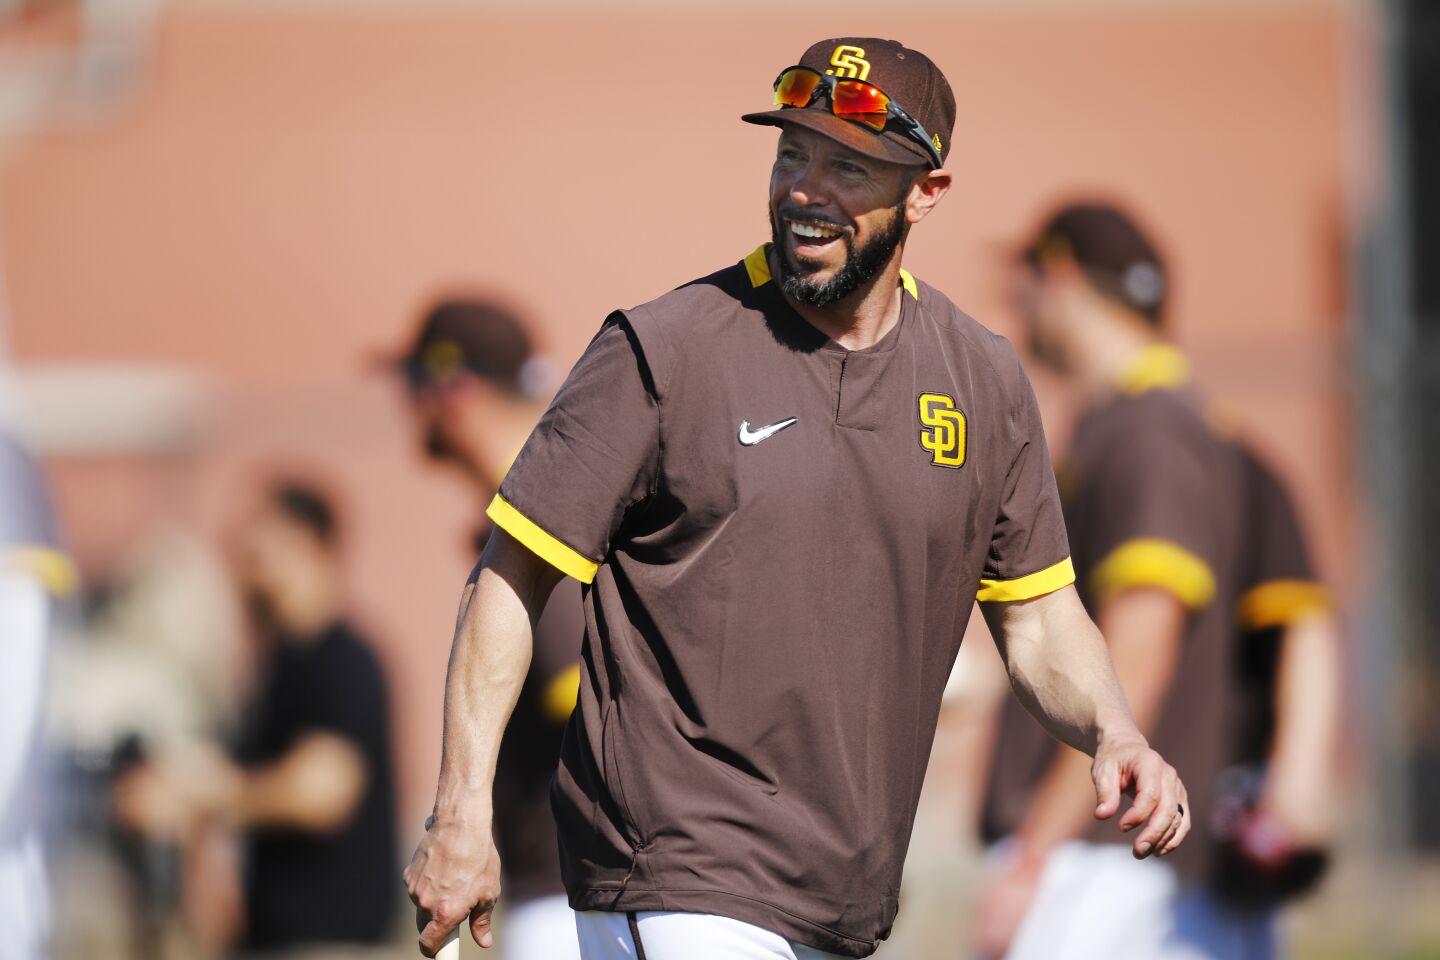 San Diego Padres manager Jayce Tingler coached the first full squad spring training practice on Feb. 18, 2020.